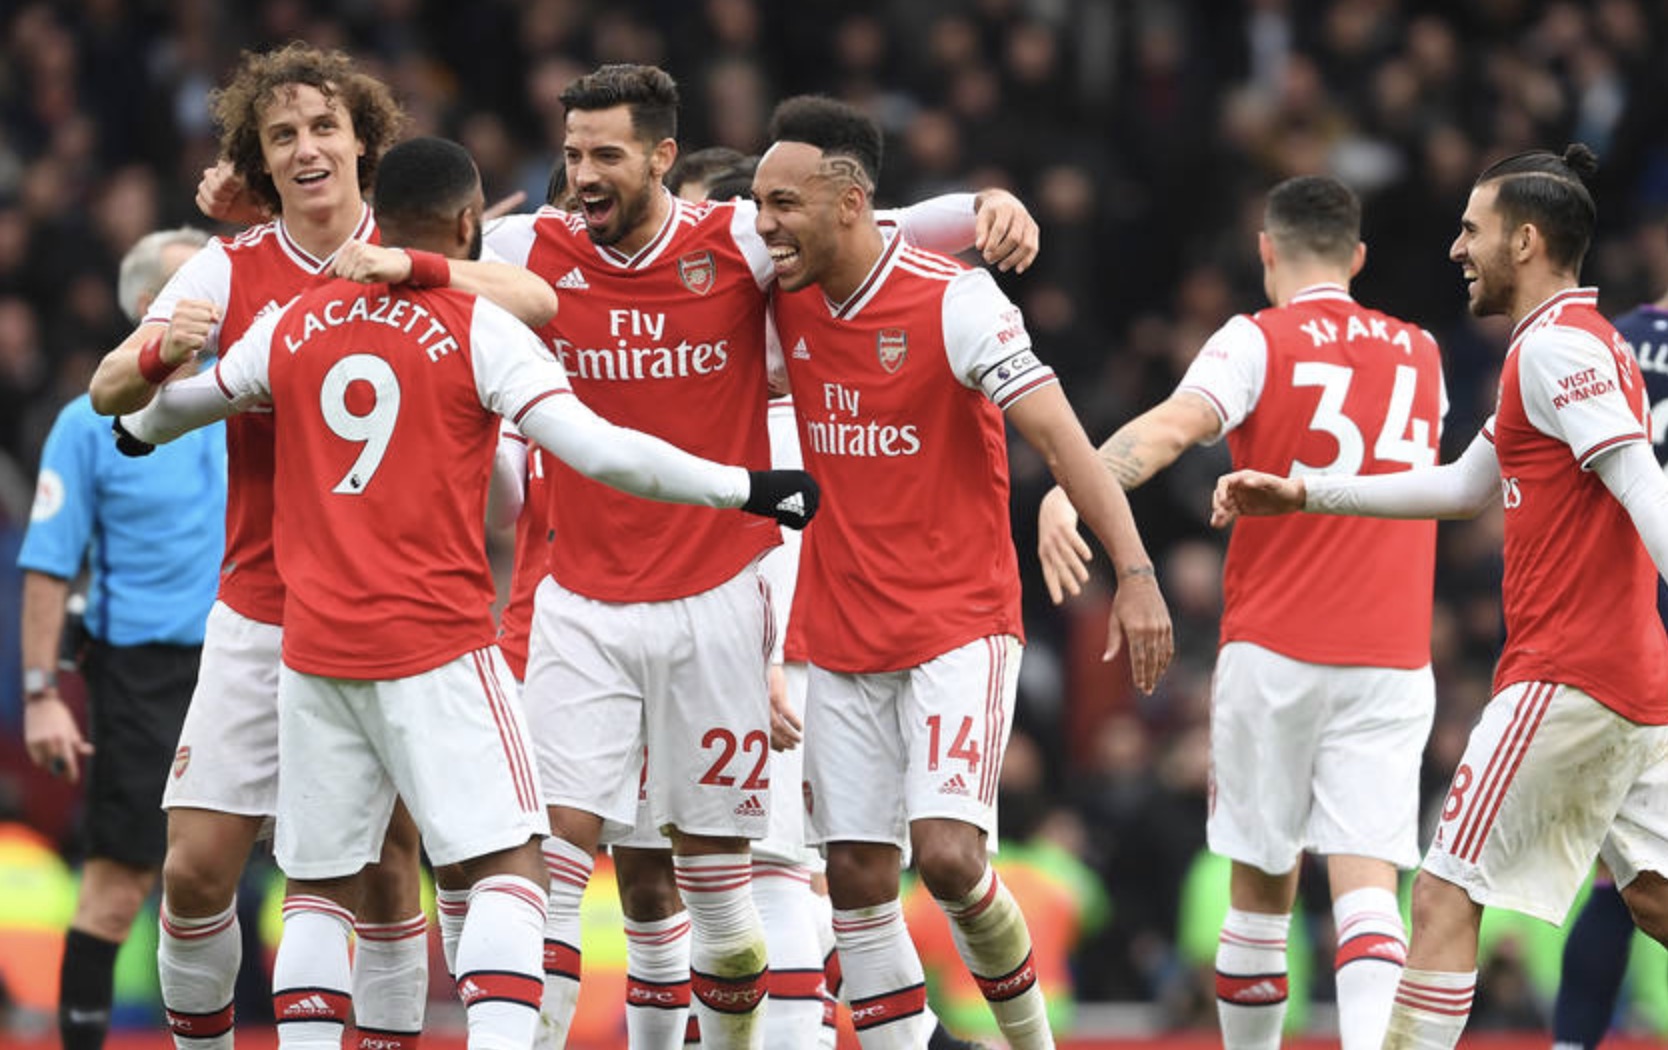 Arsenal FC players celebrating on the field.